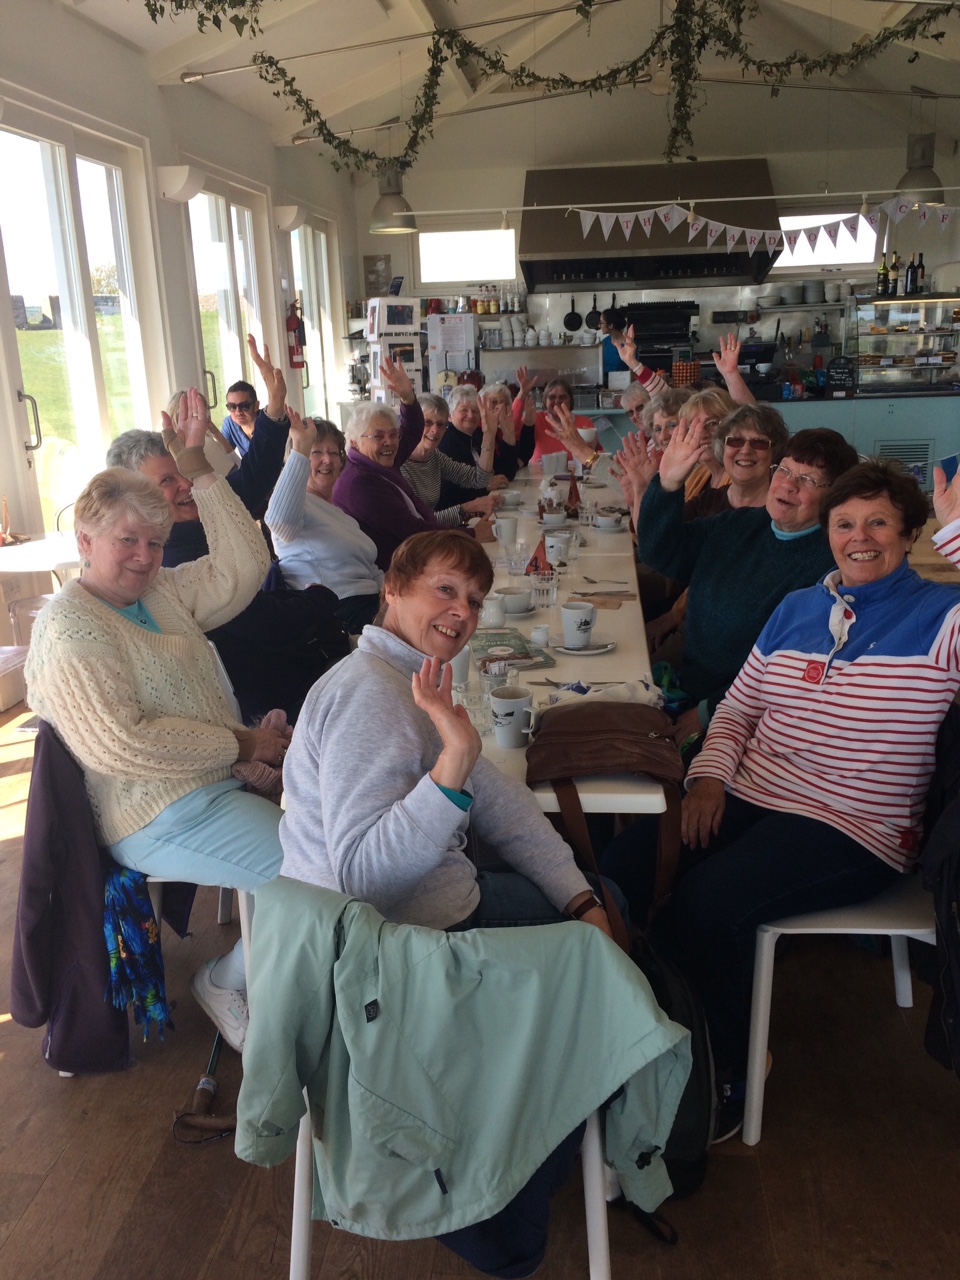 The women of Brixham WI enjoying a meal together